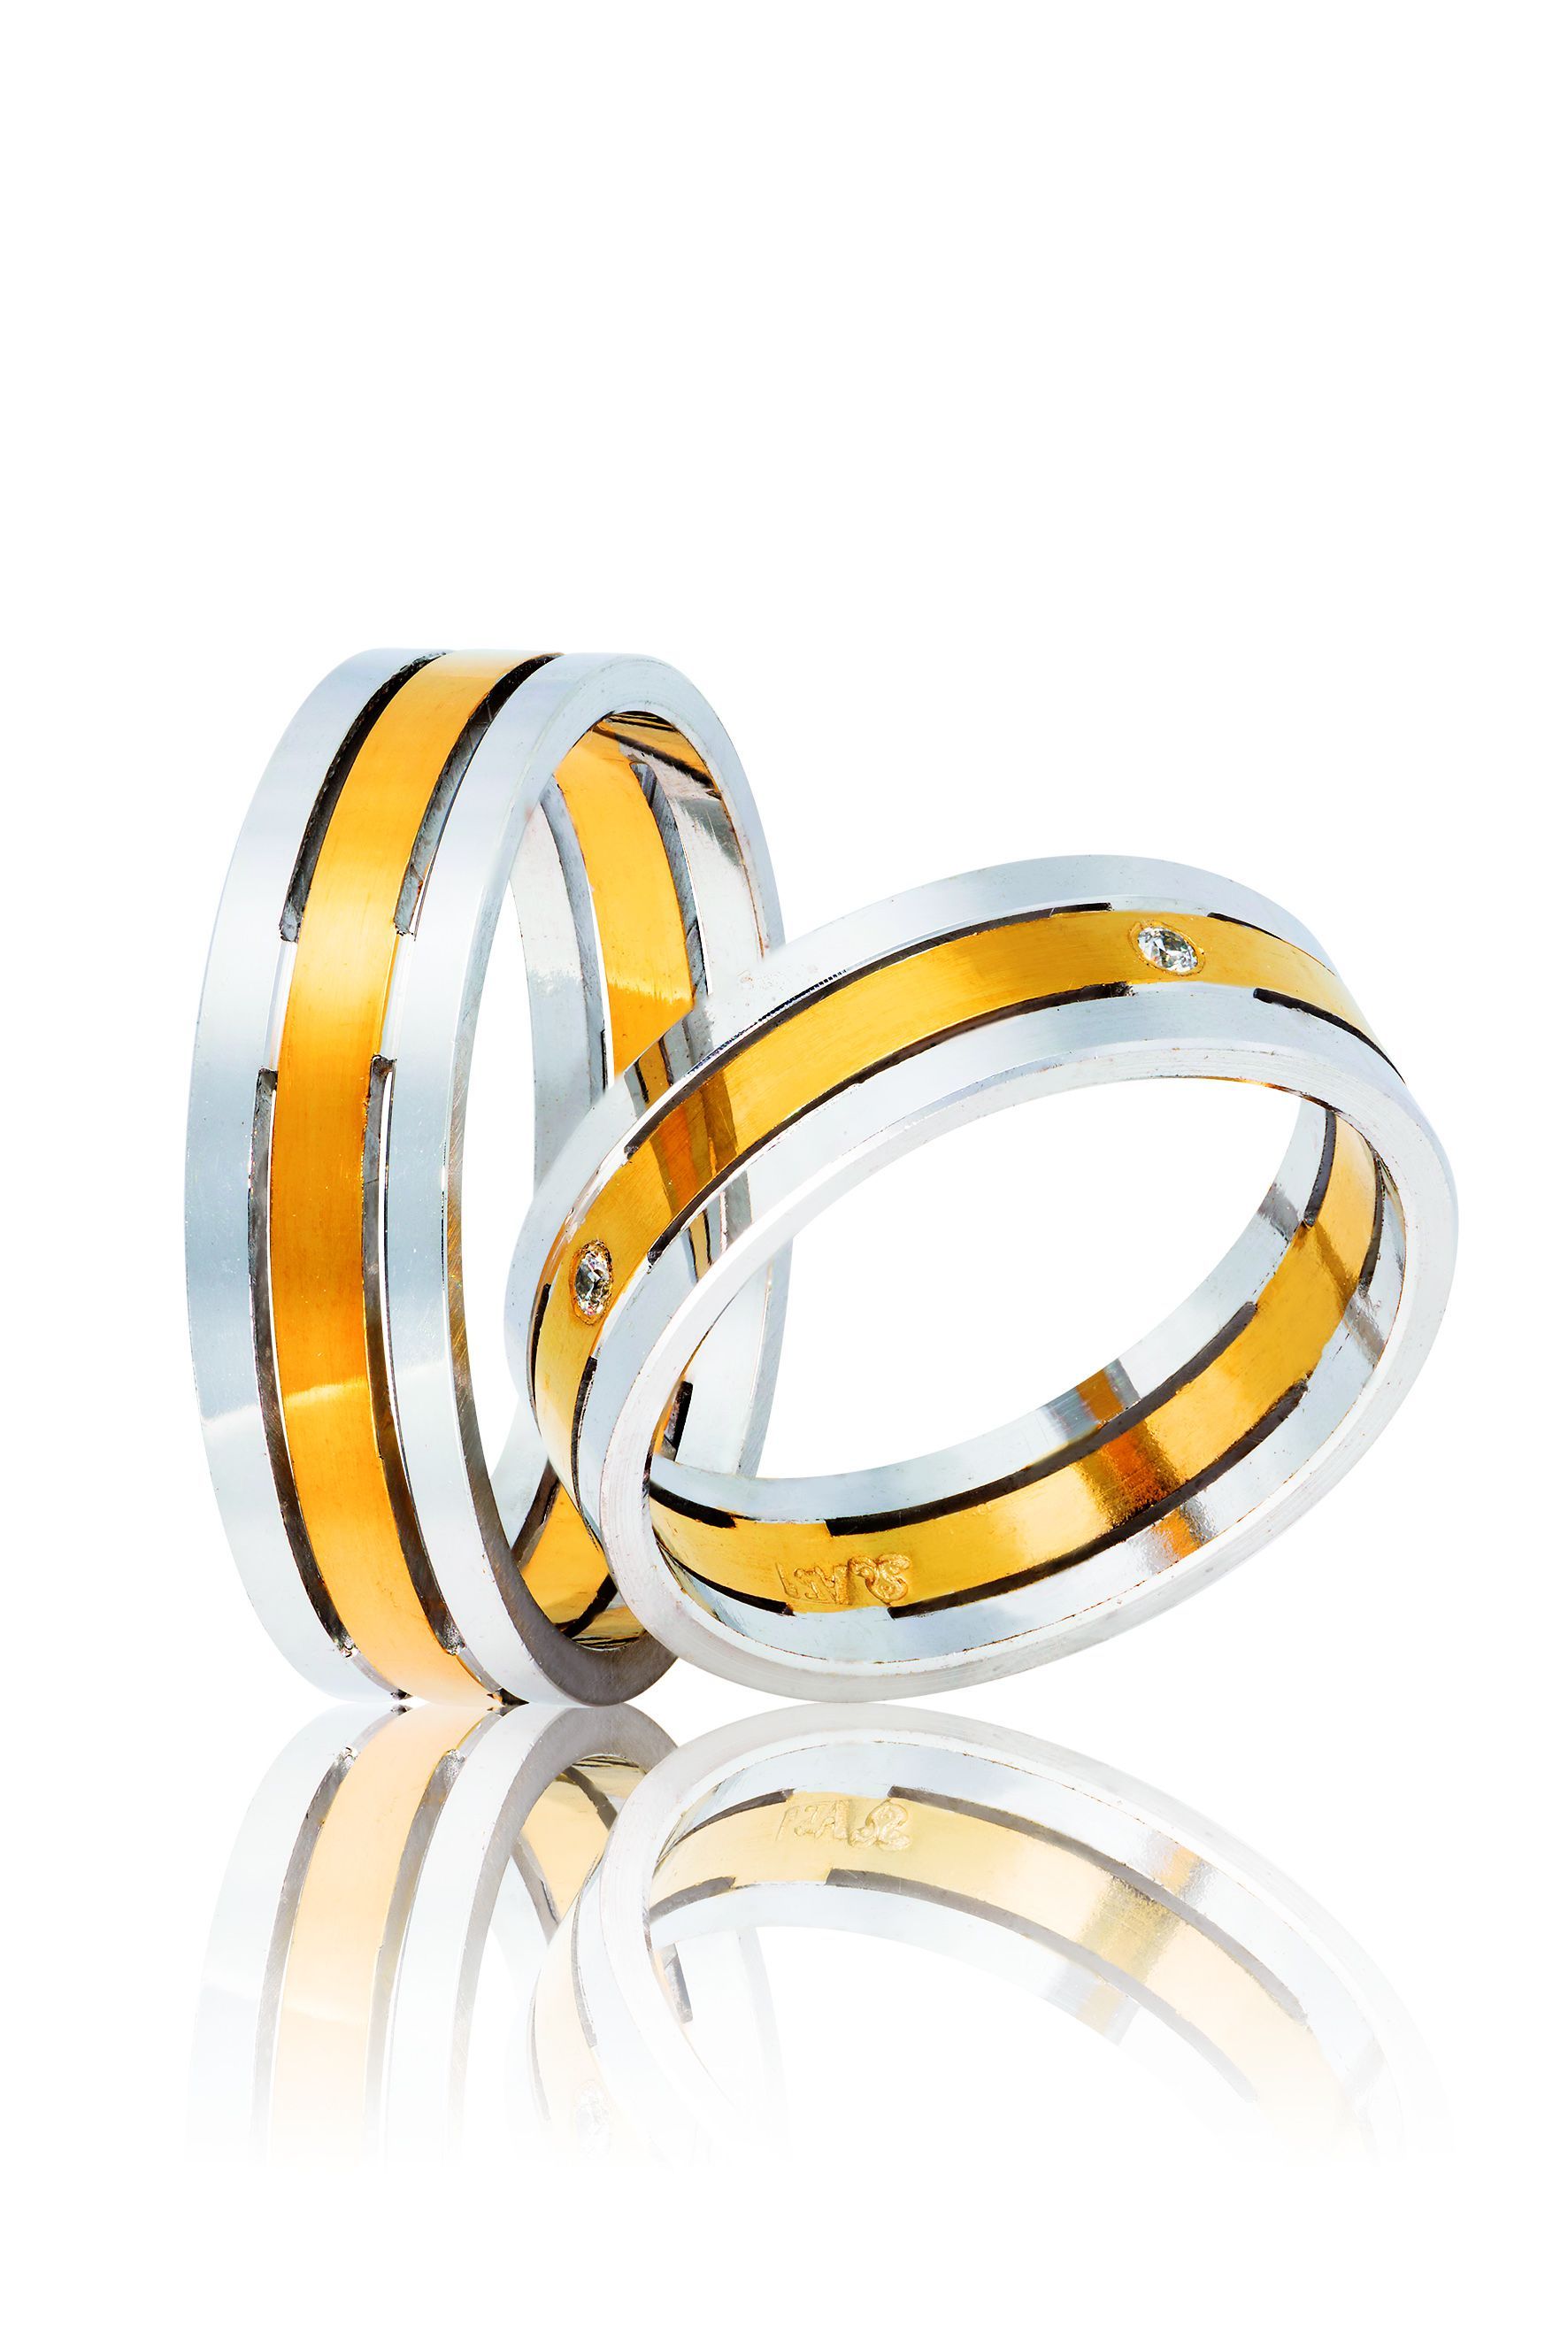 White gold & yellow gold wedding rings 6mm (code 3wyw)